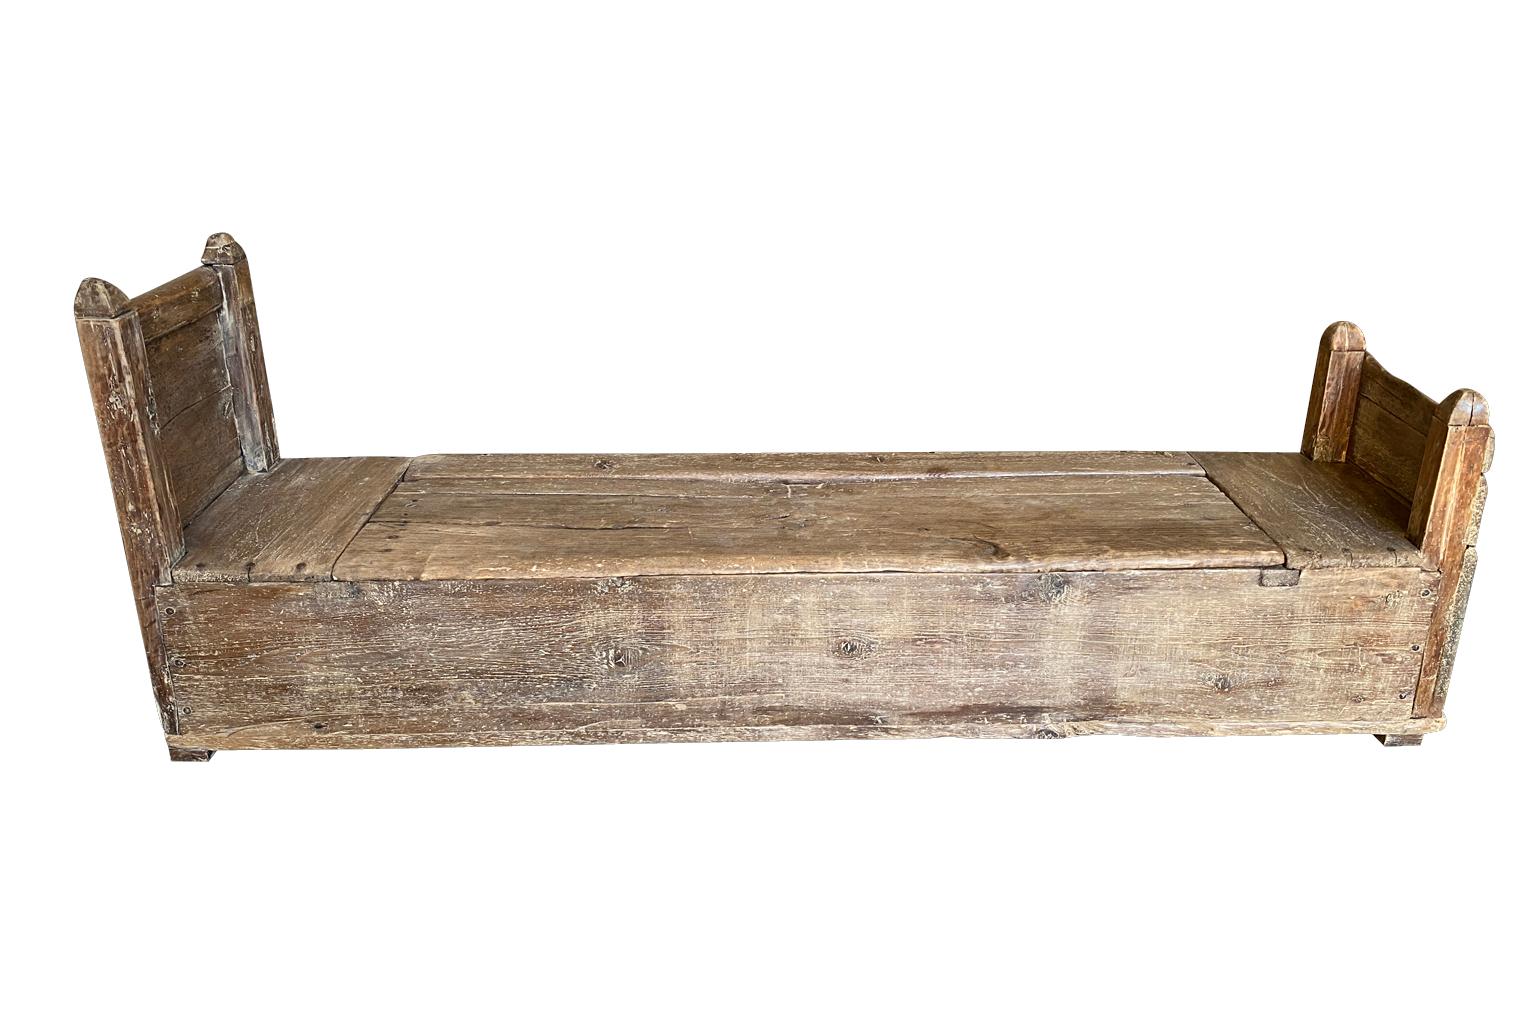 A sensational 18th century primitive Arte Populaire bench - coffre from the Ardeche region of France.  Wonderfully constructed from naturally washed pine with a super patina.  The seat lifts to reveal the coffre storage space.